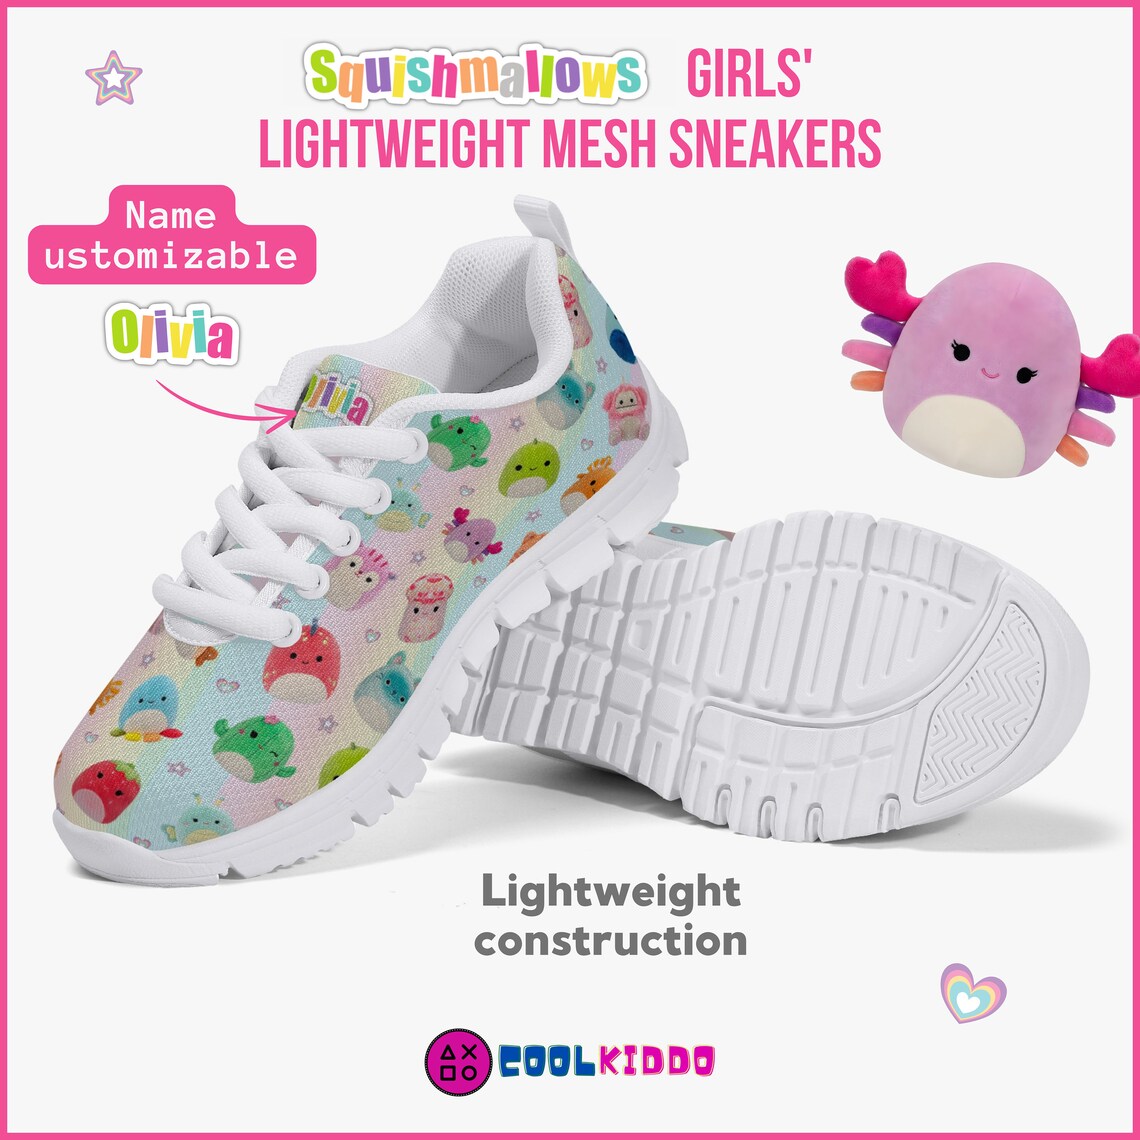 Personalized Squishmallows shoes for Kids’ Lightweight Mesh Sneakers Cool Kiddo 10